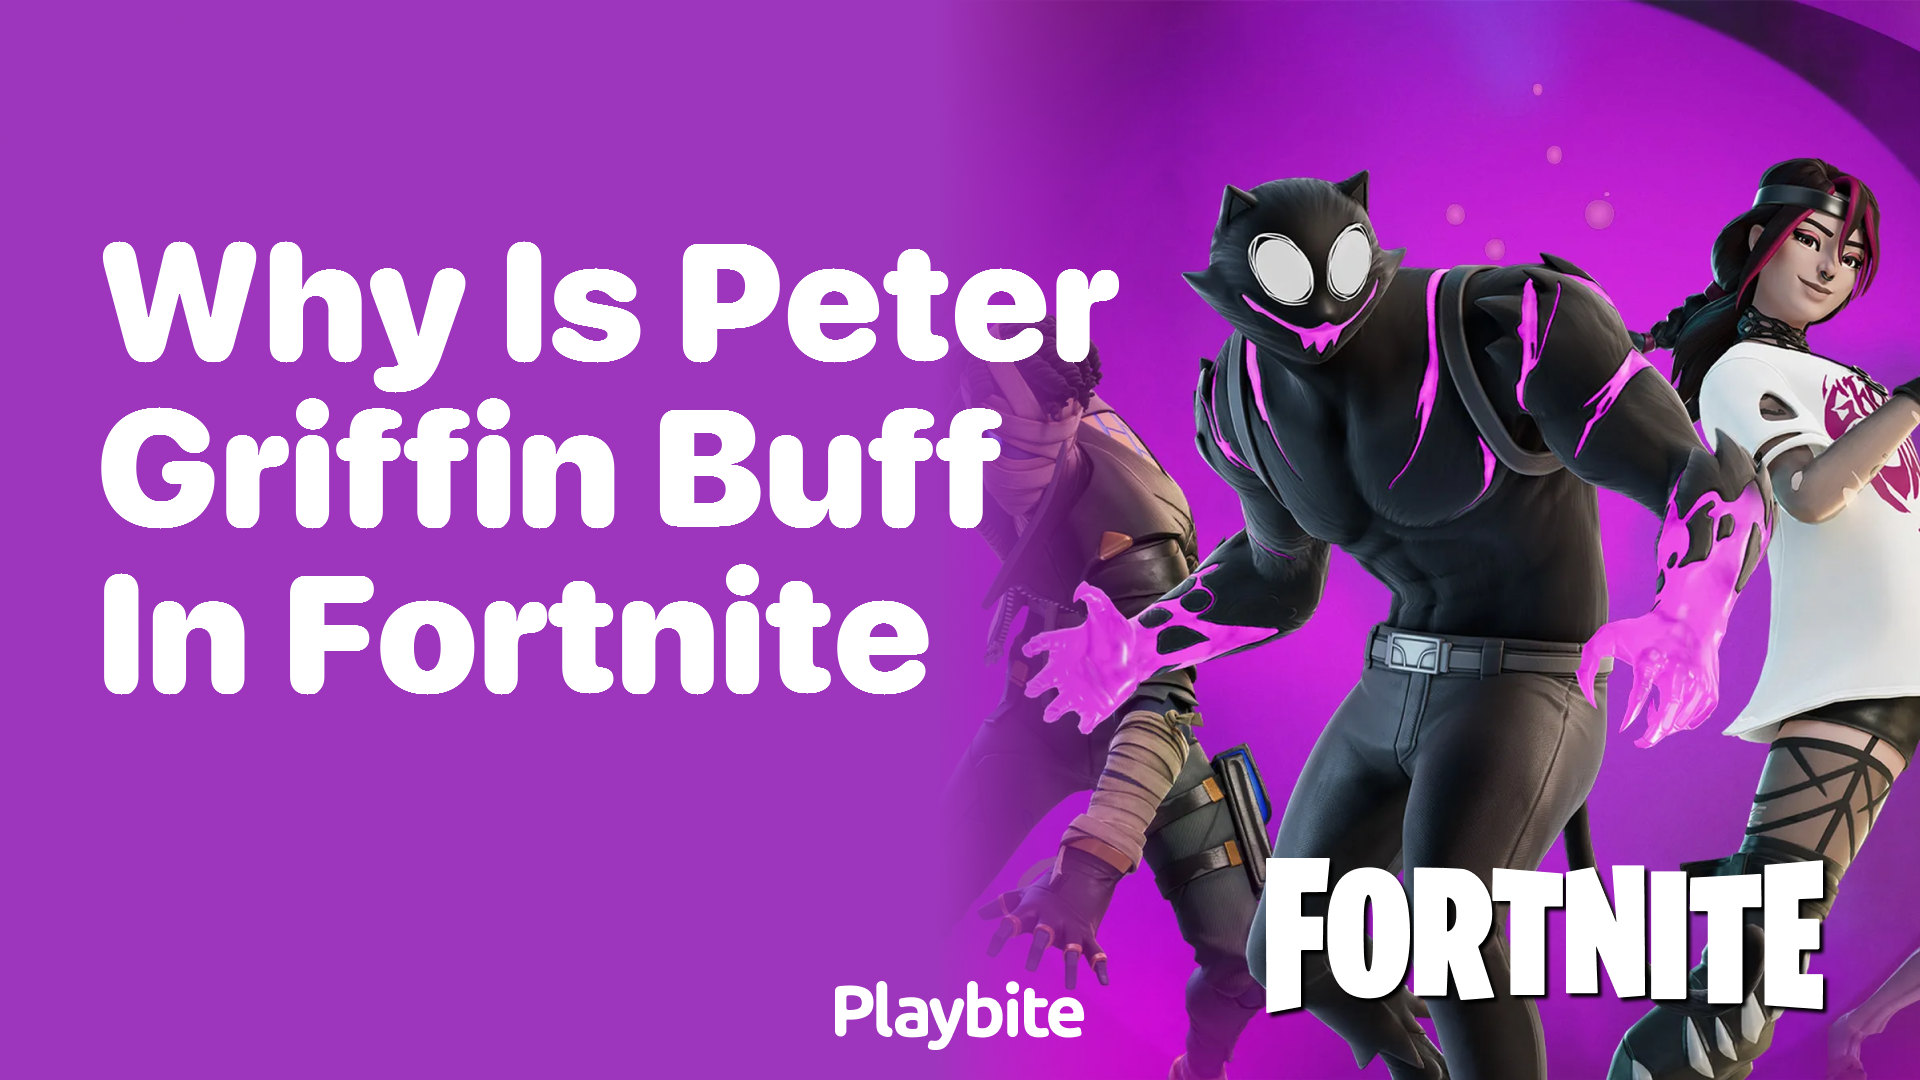 Why Is Peter Griffin Buff in Fortnite?